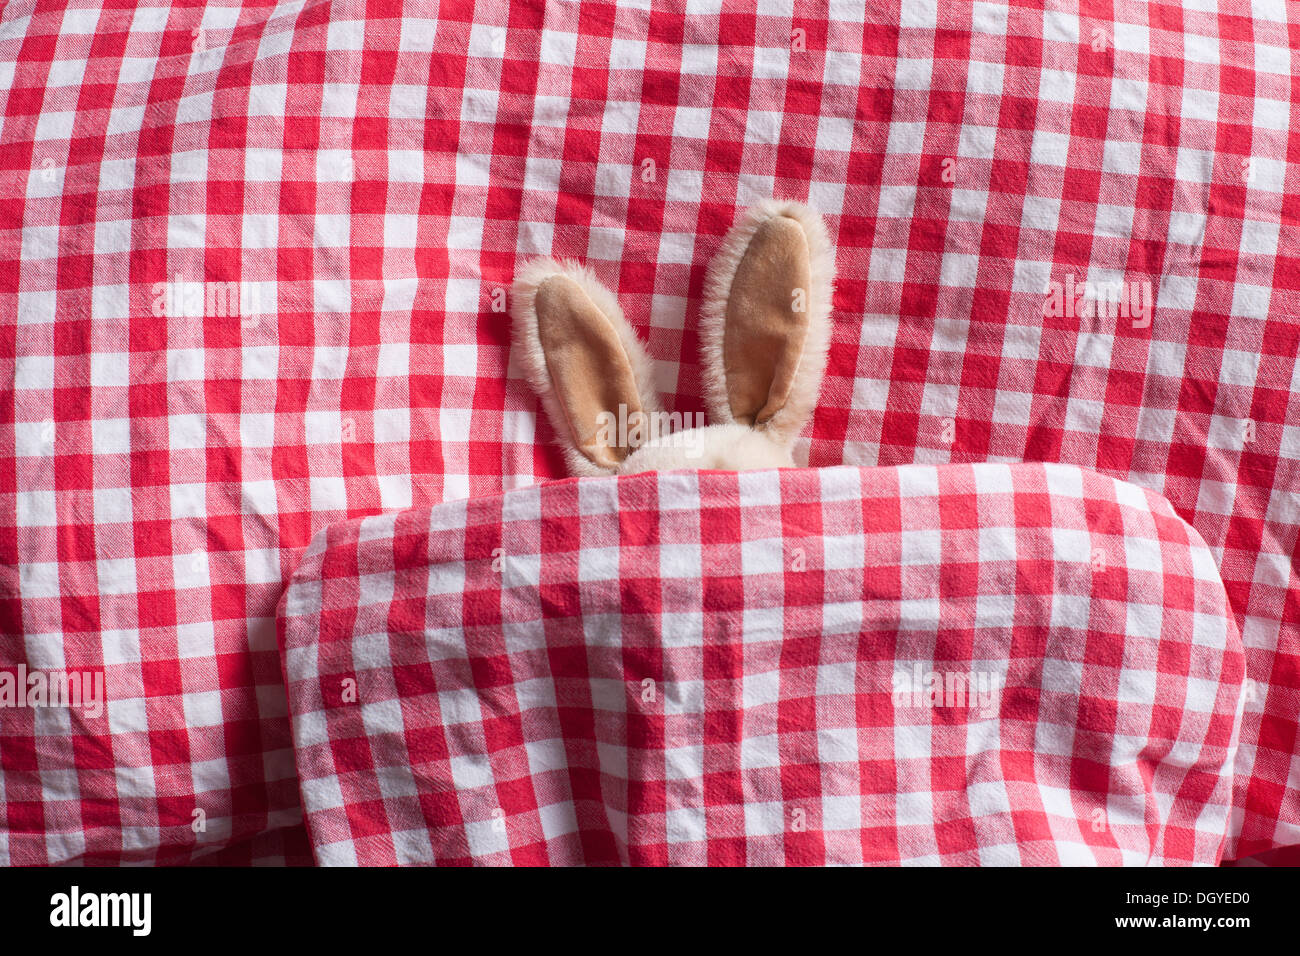 A stuffed bunny's ears sticking out of a gingham duvet Stock Photo